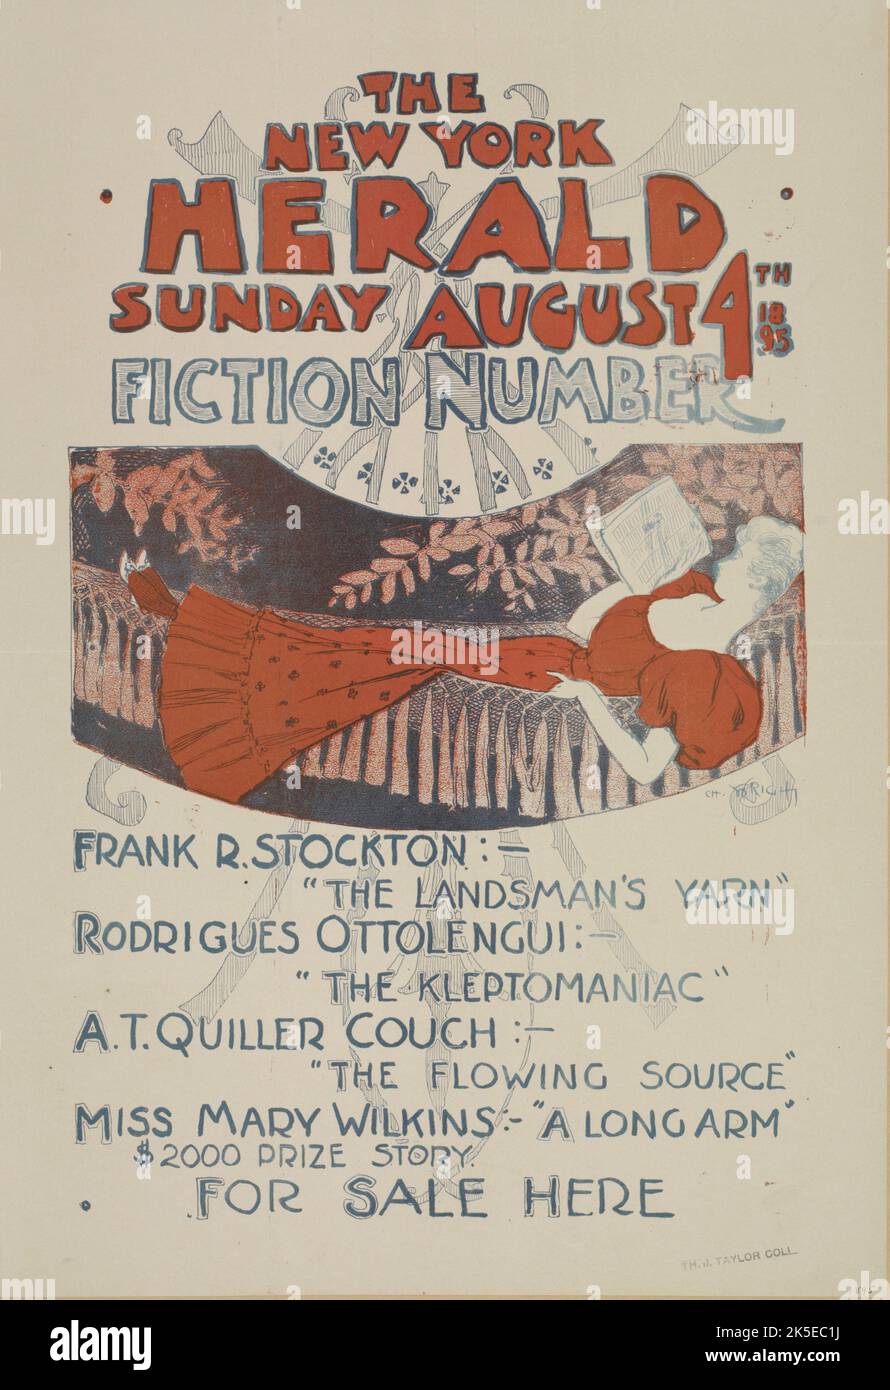 The New York Sunday herald. Sunday August 4th 1895 fiction number., c1895. Stock Photo